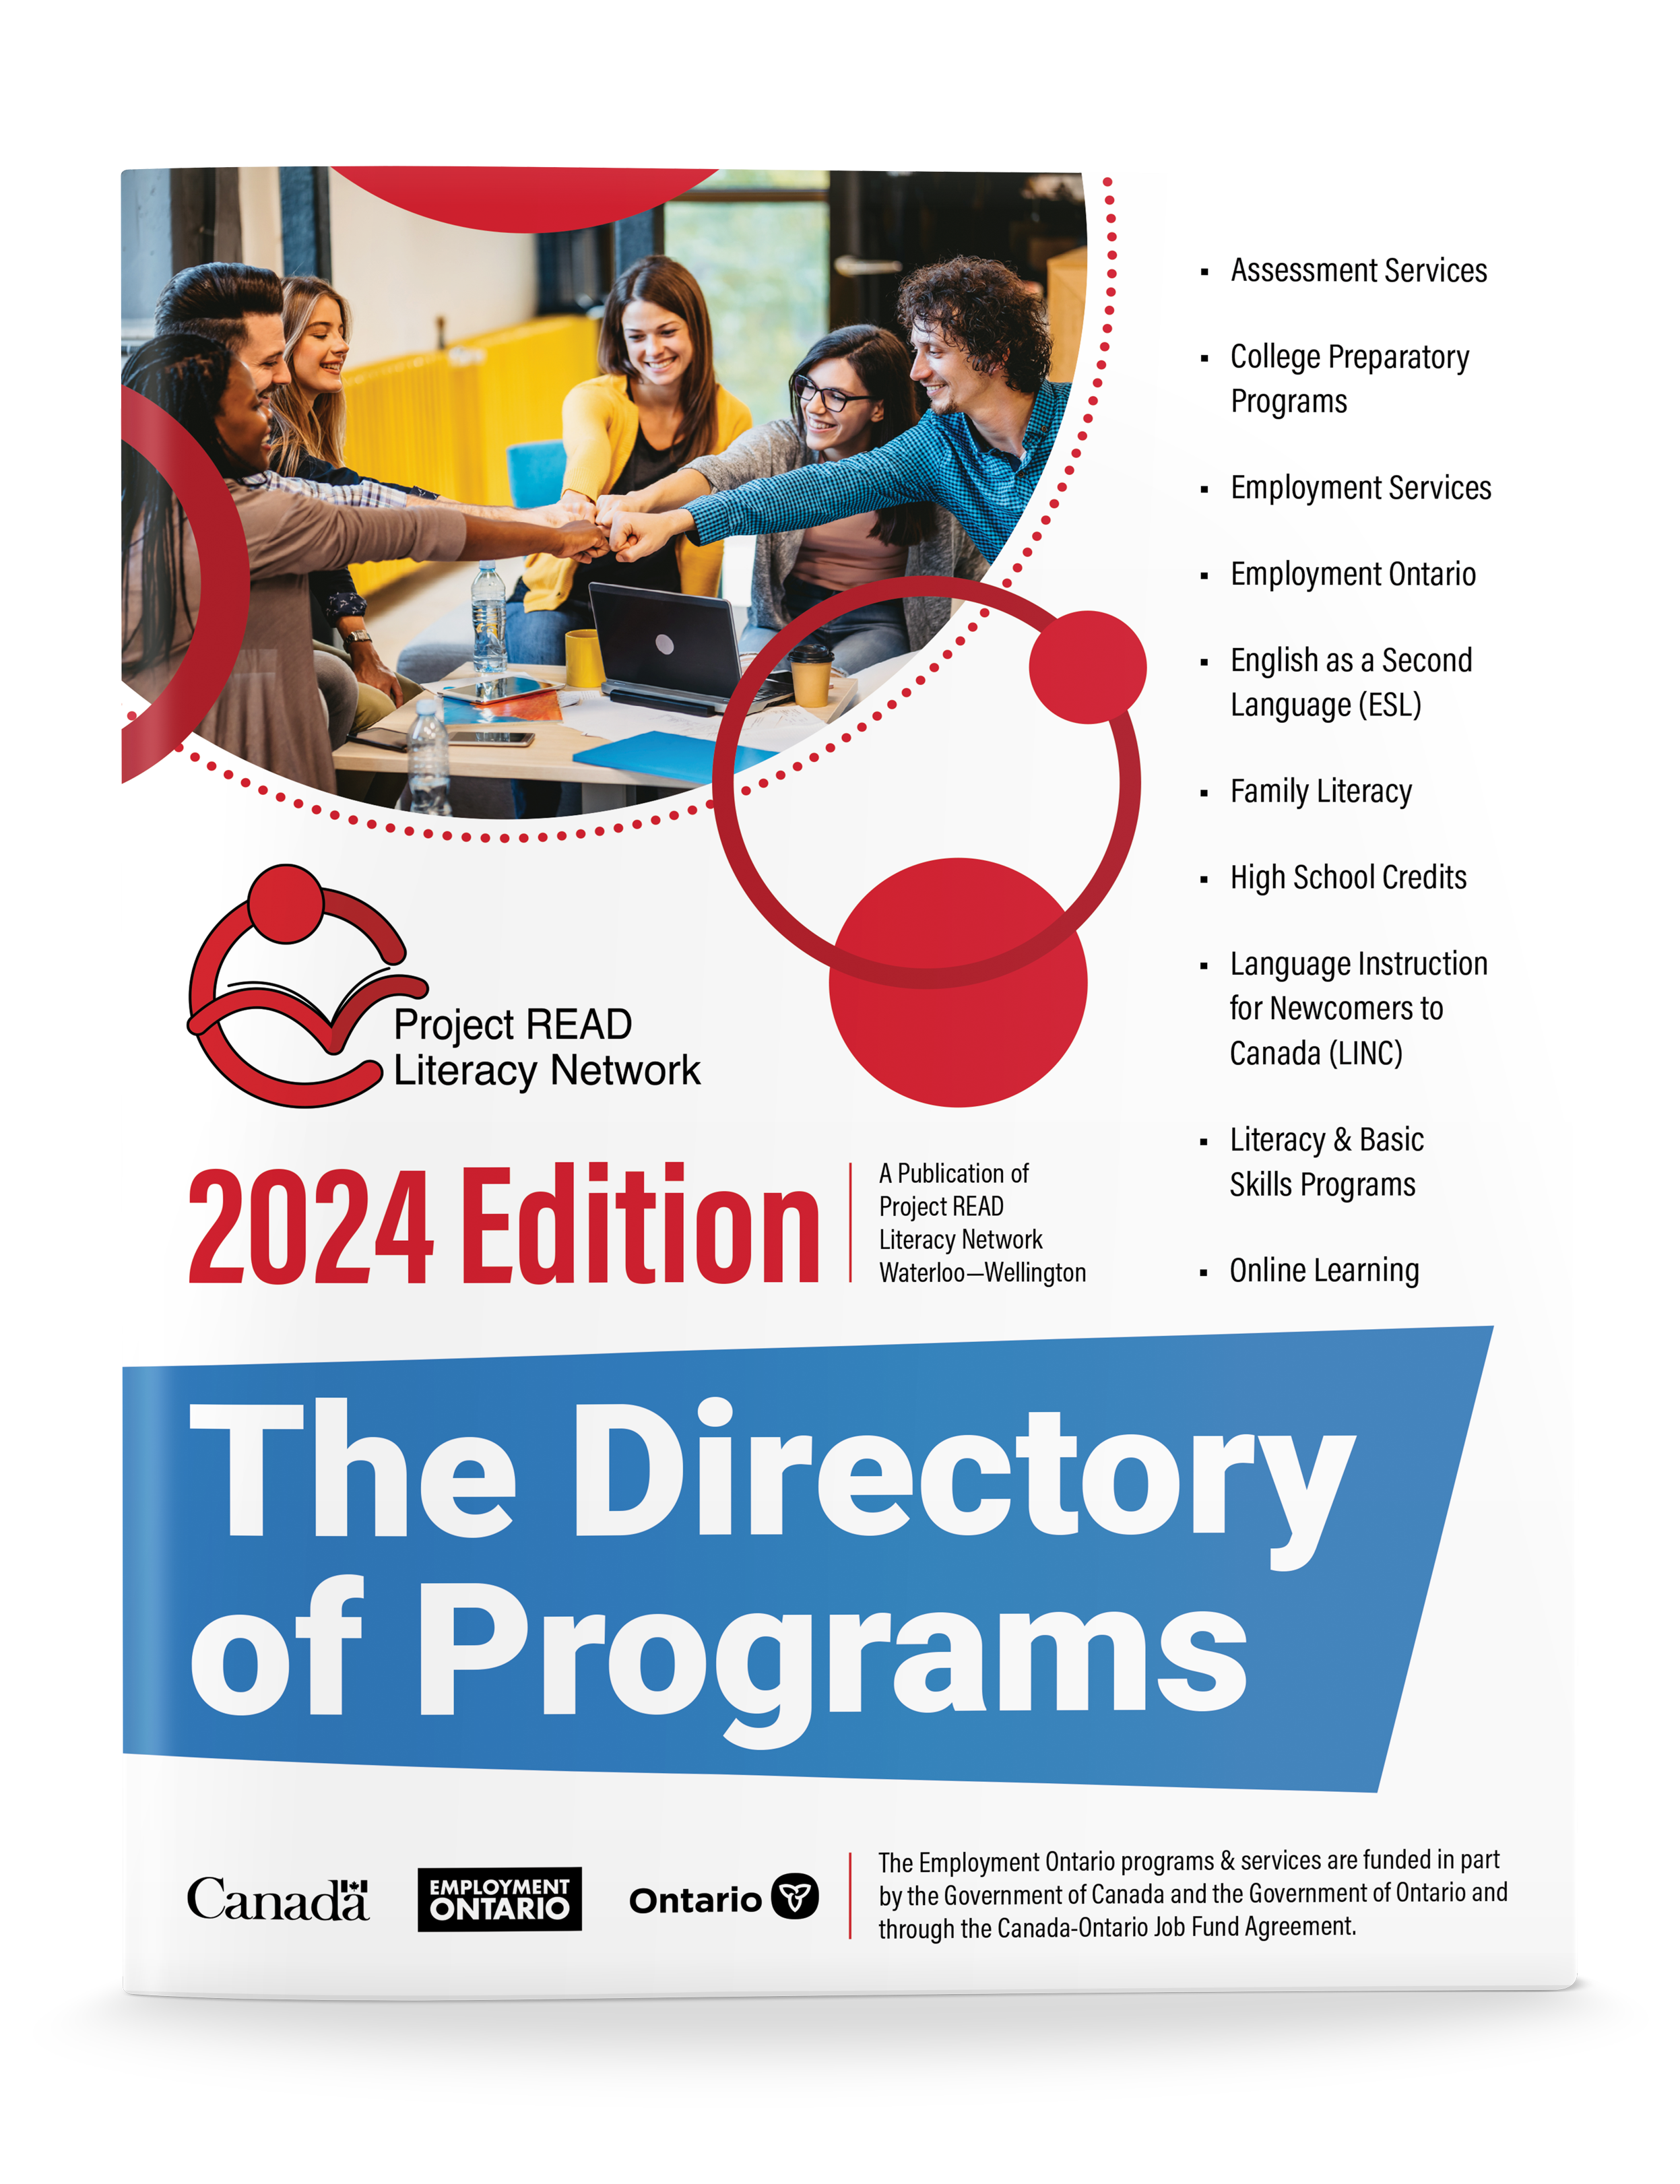 The Directory of Programs